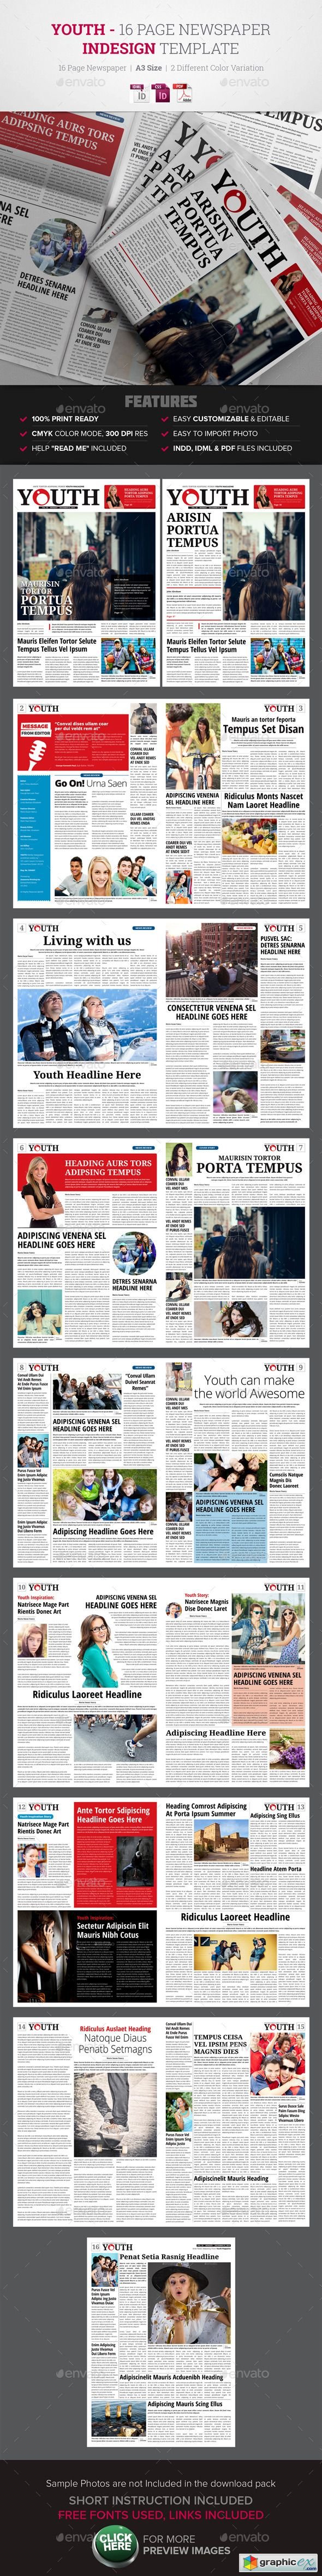 Youth - 16 Page Newspaper Indesign Template